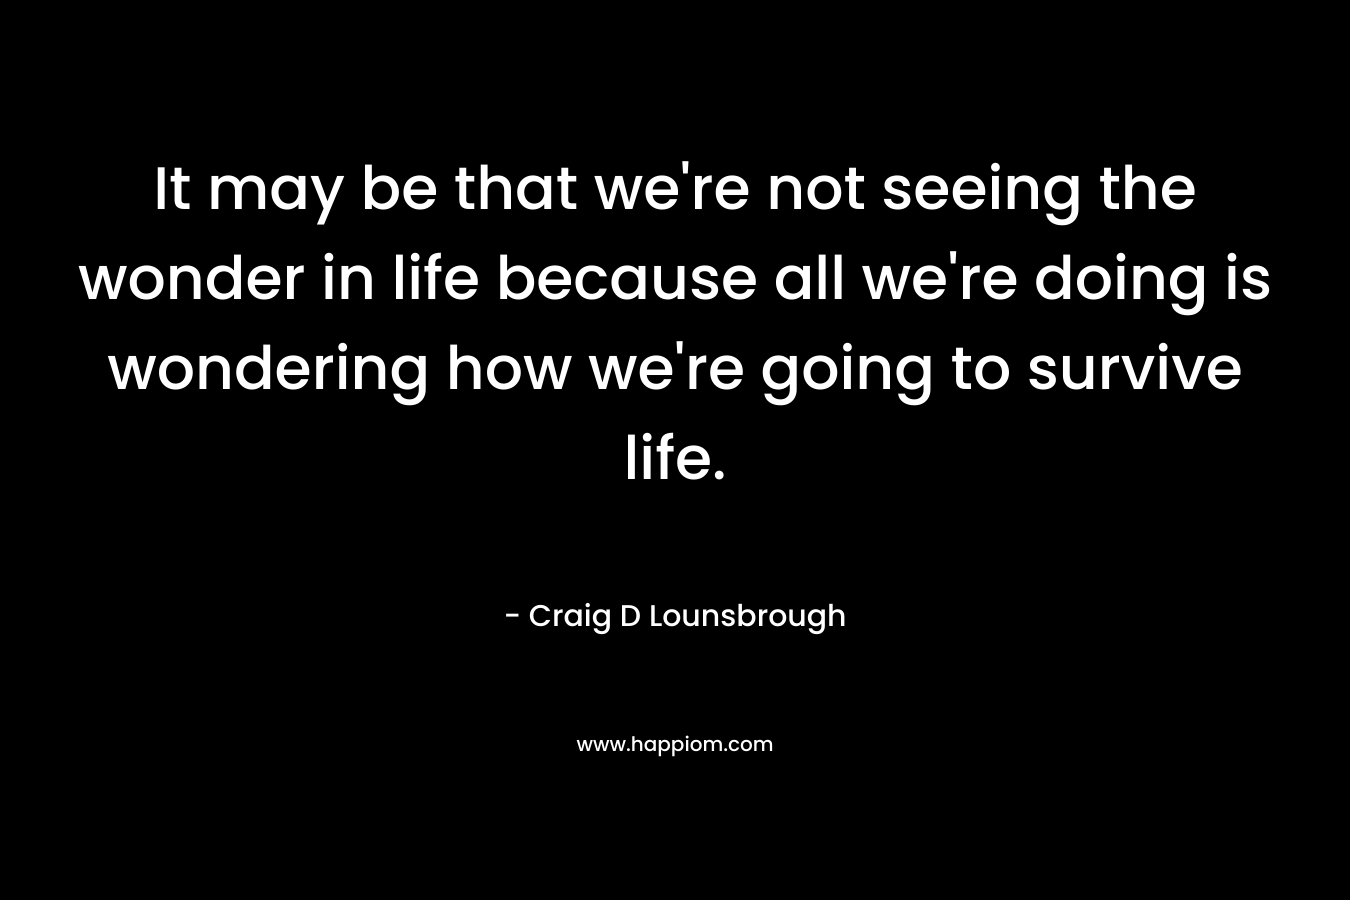 It may be that we're not seeing the wonder in life because all we're doing is wondering how we're going to survive life.